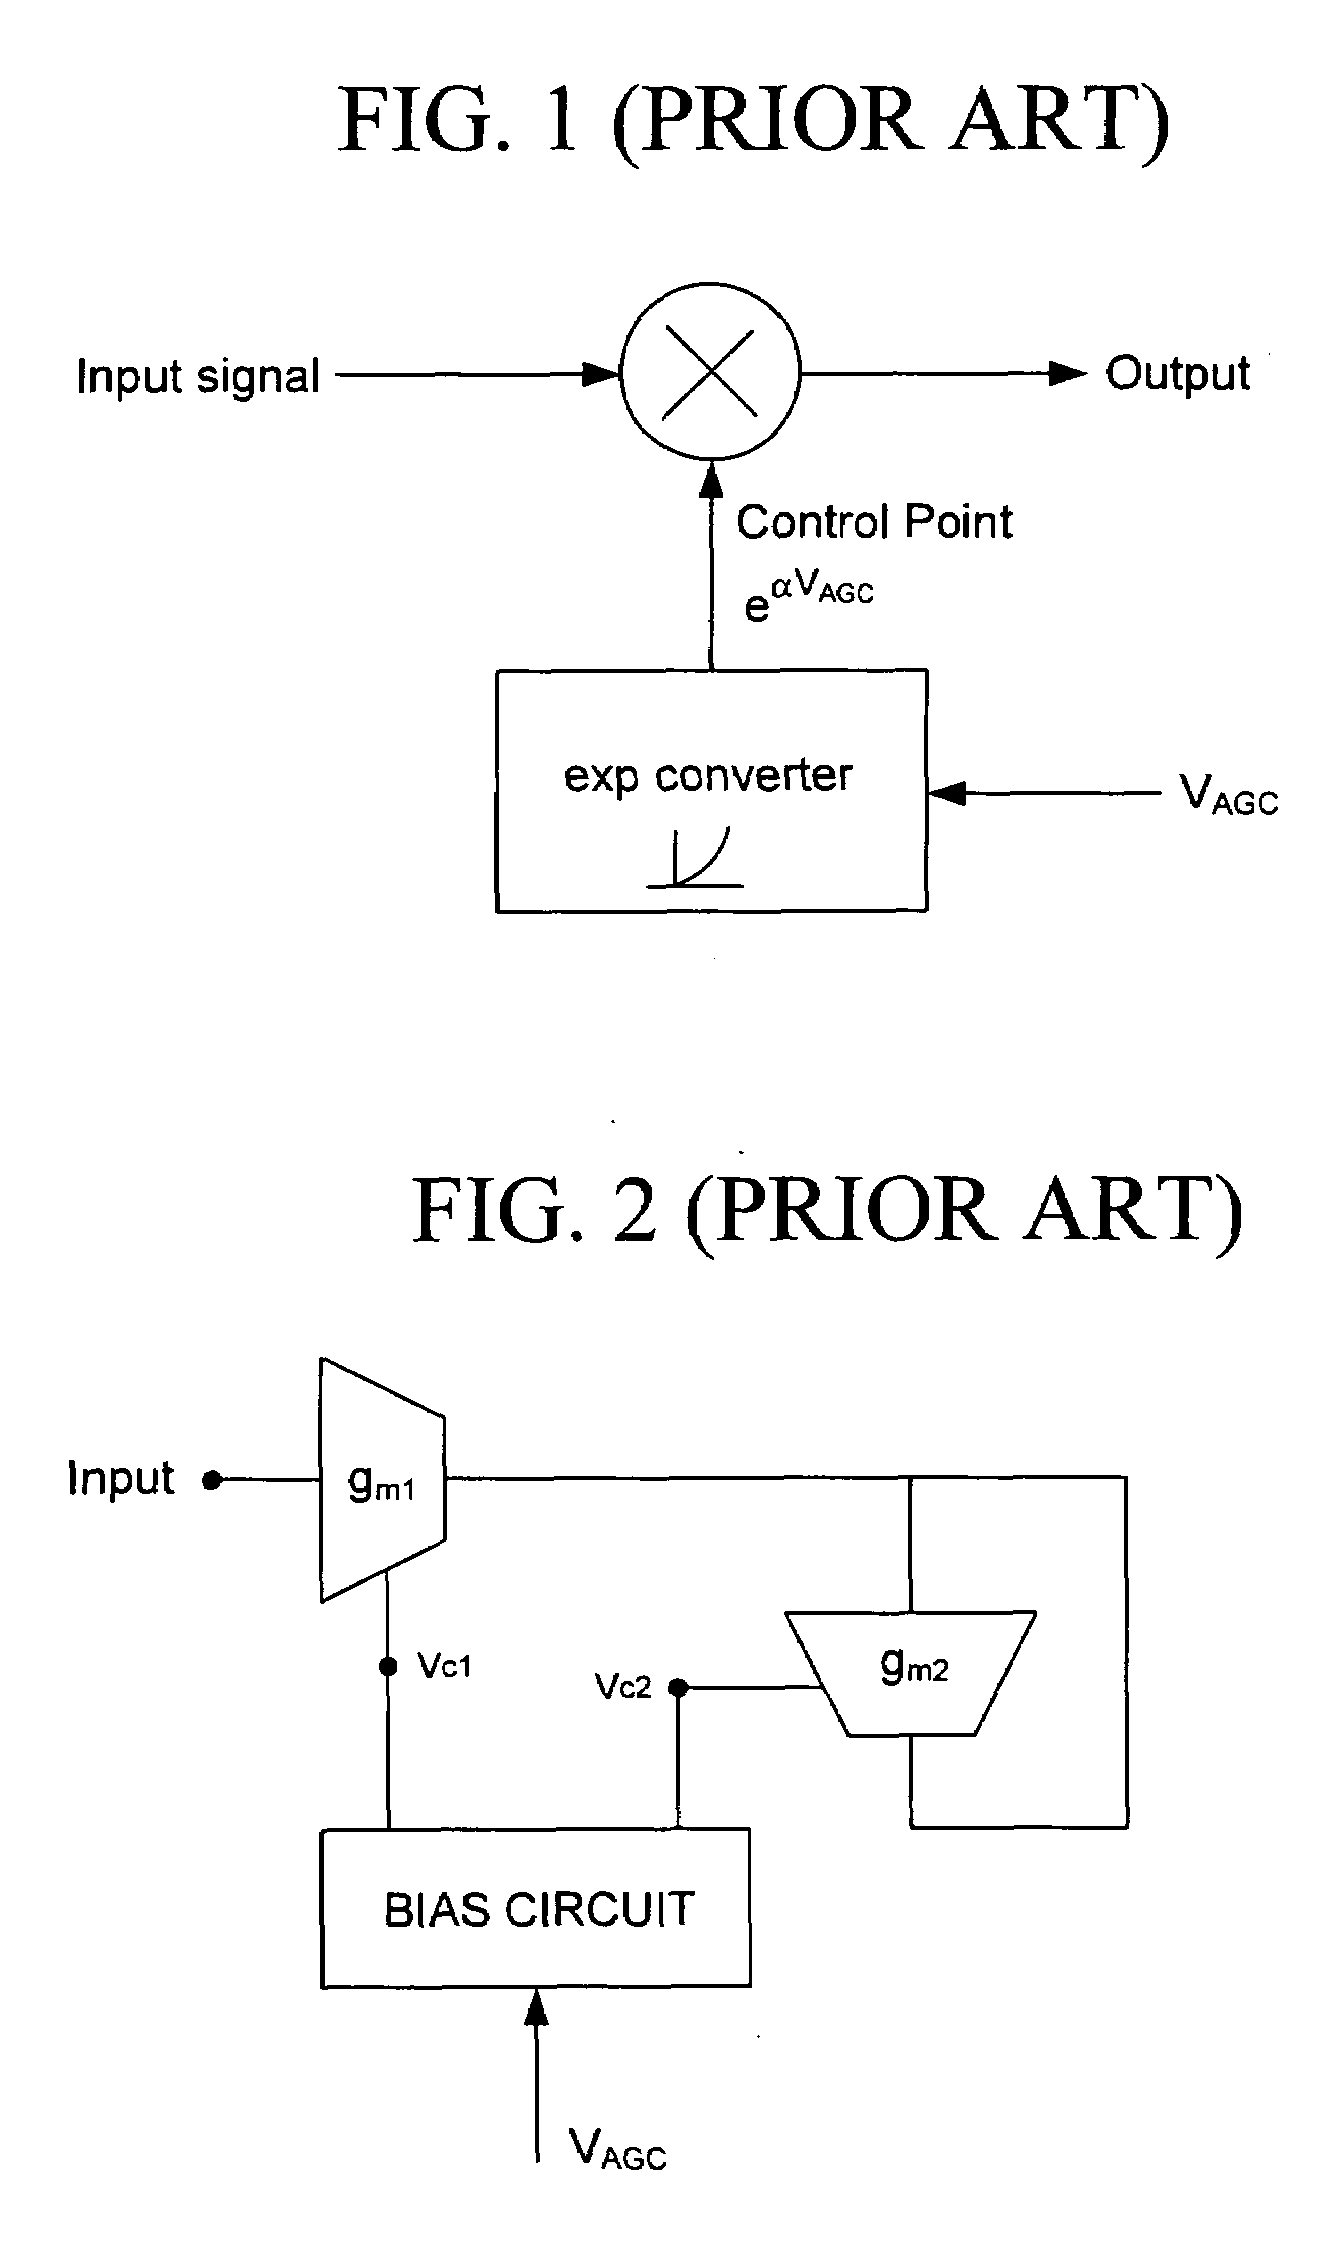 dB-linear analog variable gain amplifier (VGA) realization system and method